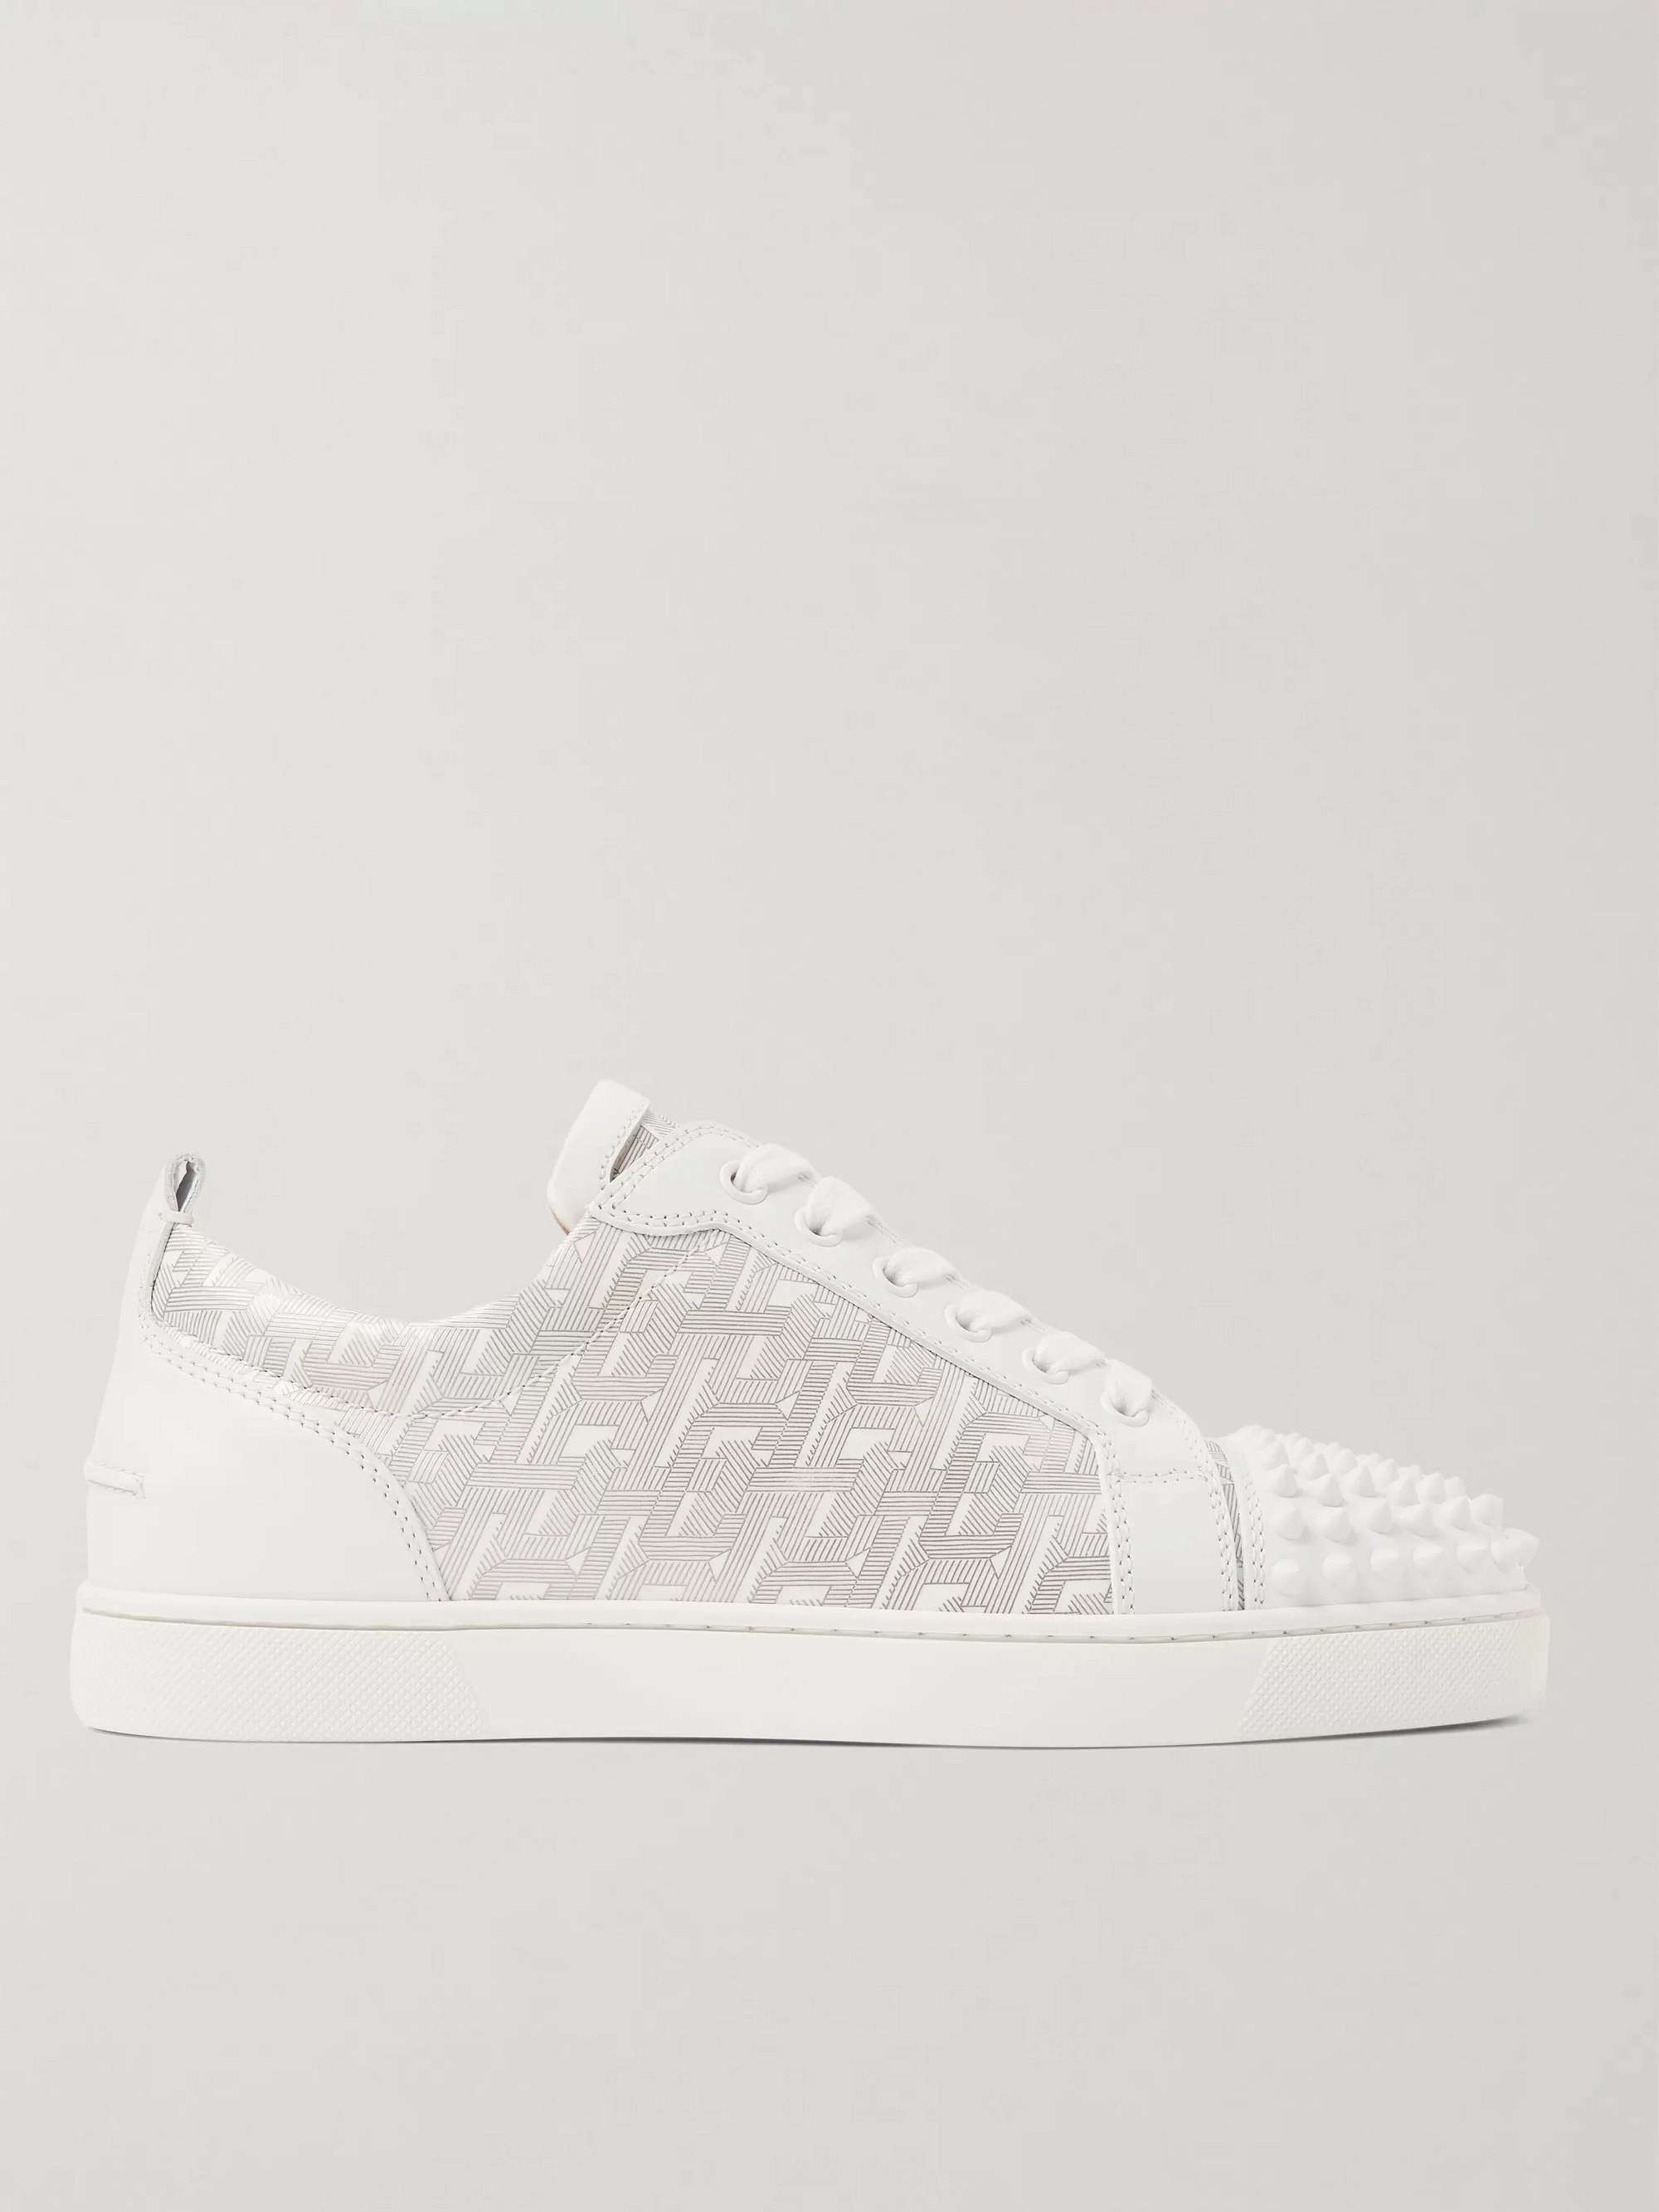 CHRISTIAN LOUBOUTIN Louis Junior Spikes Printed Leather Sneakers for Men |  MR PORTER